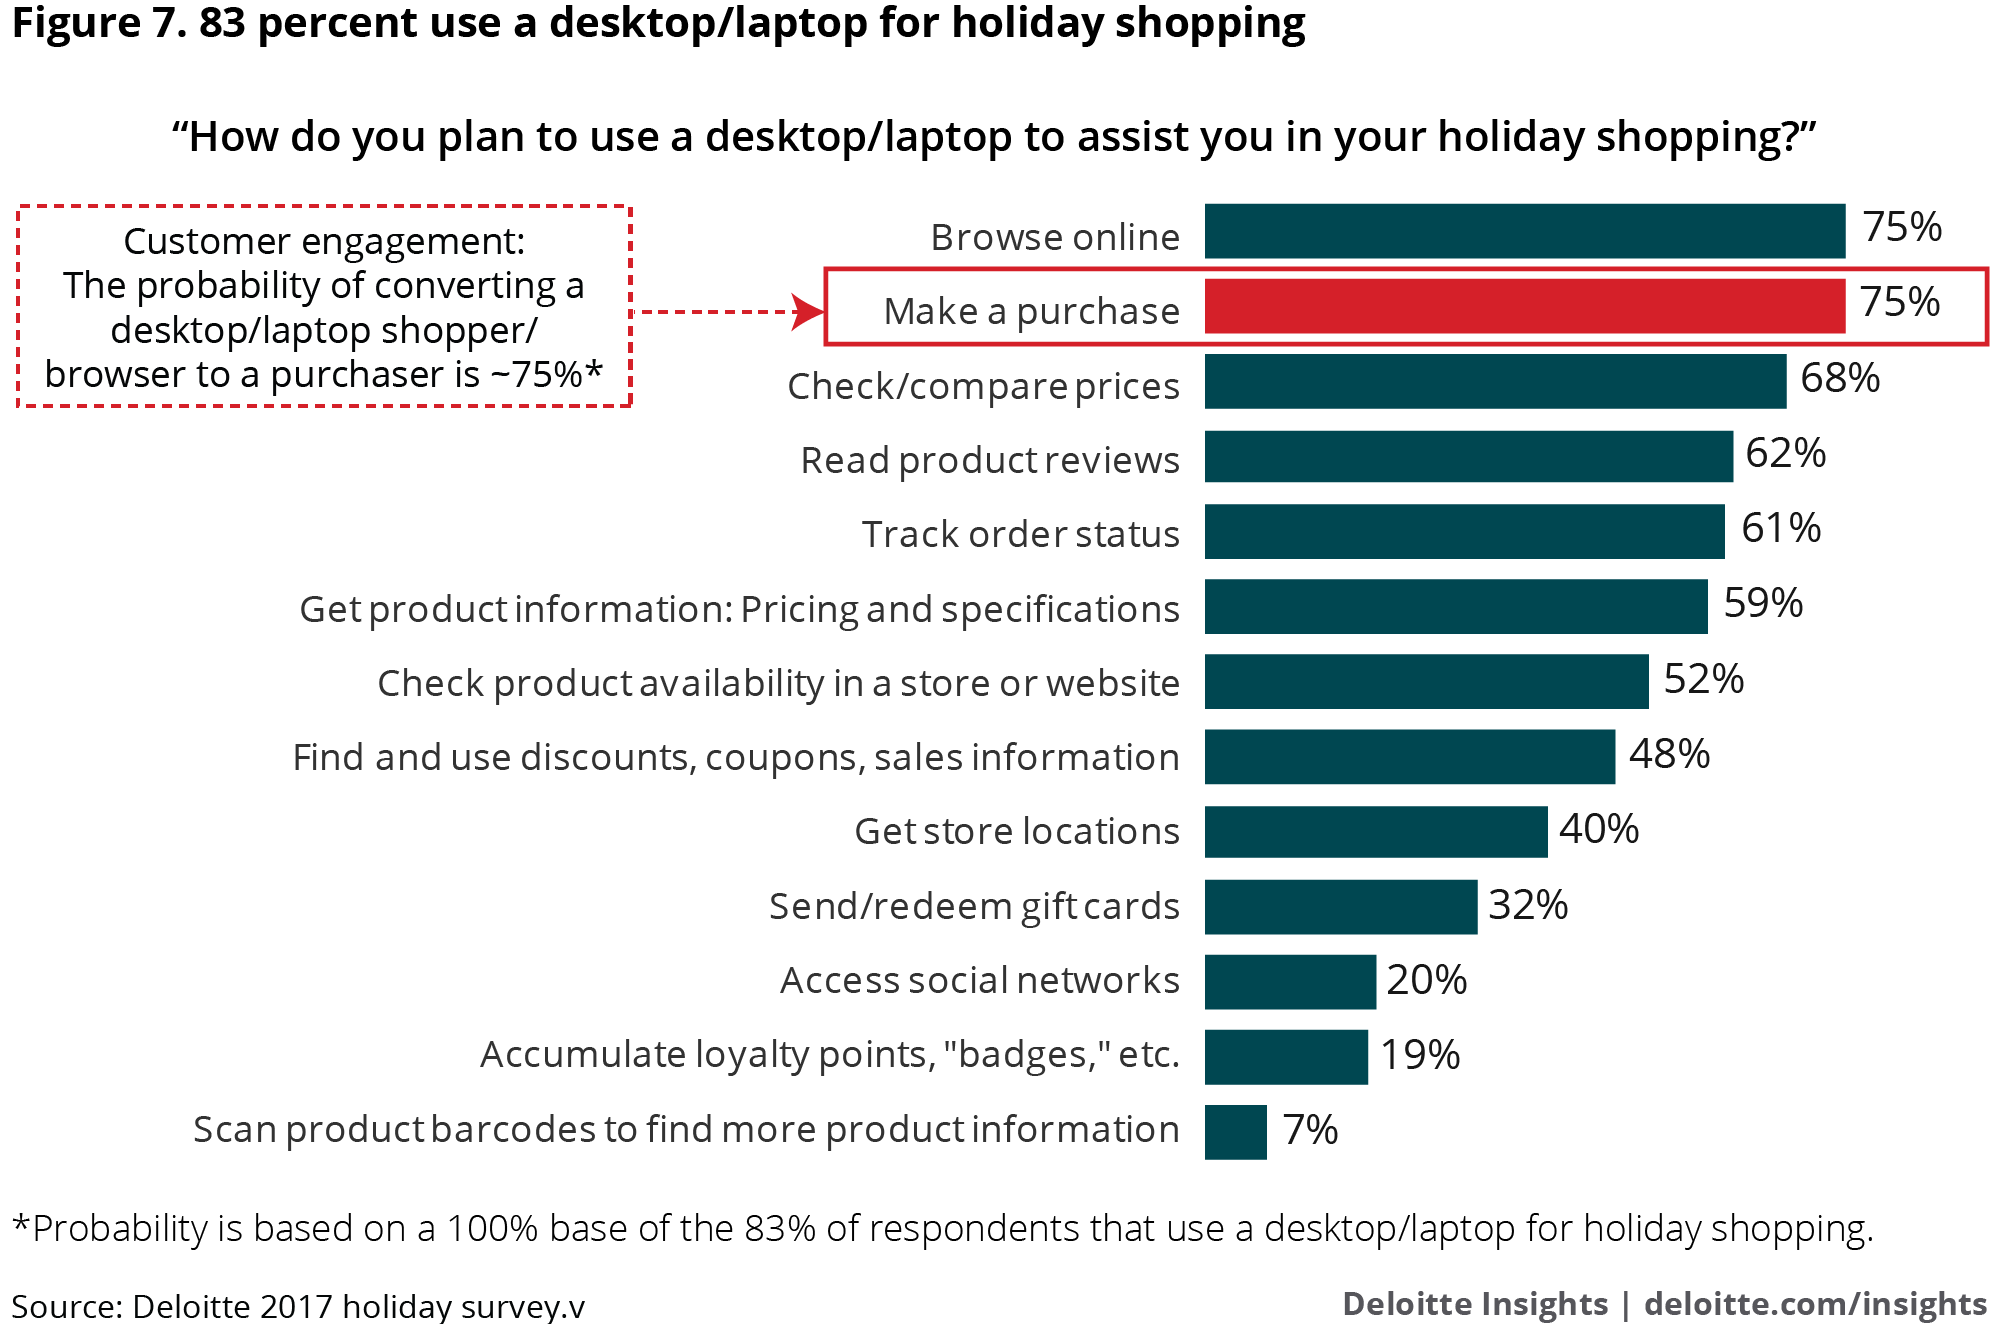 Desktop and laptop usage for holiday shopping